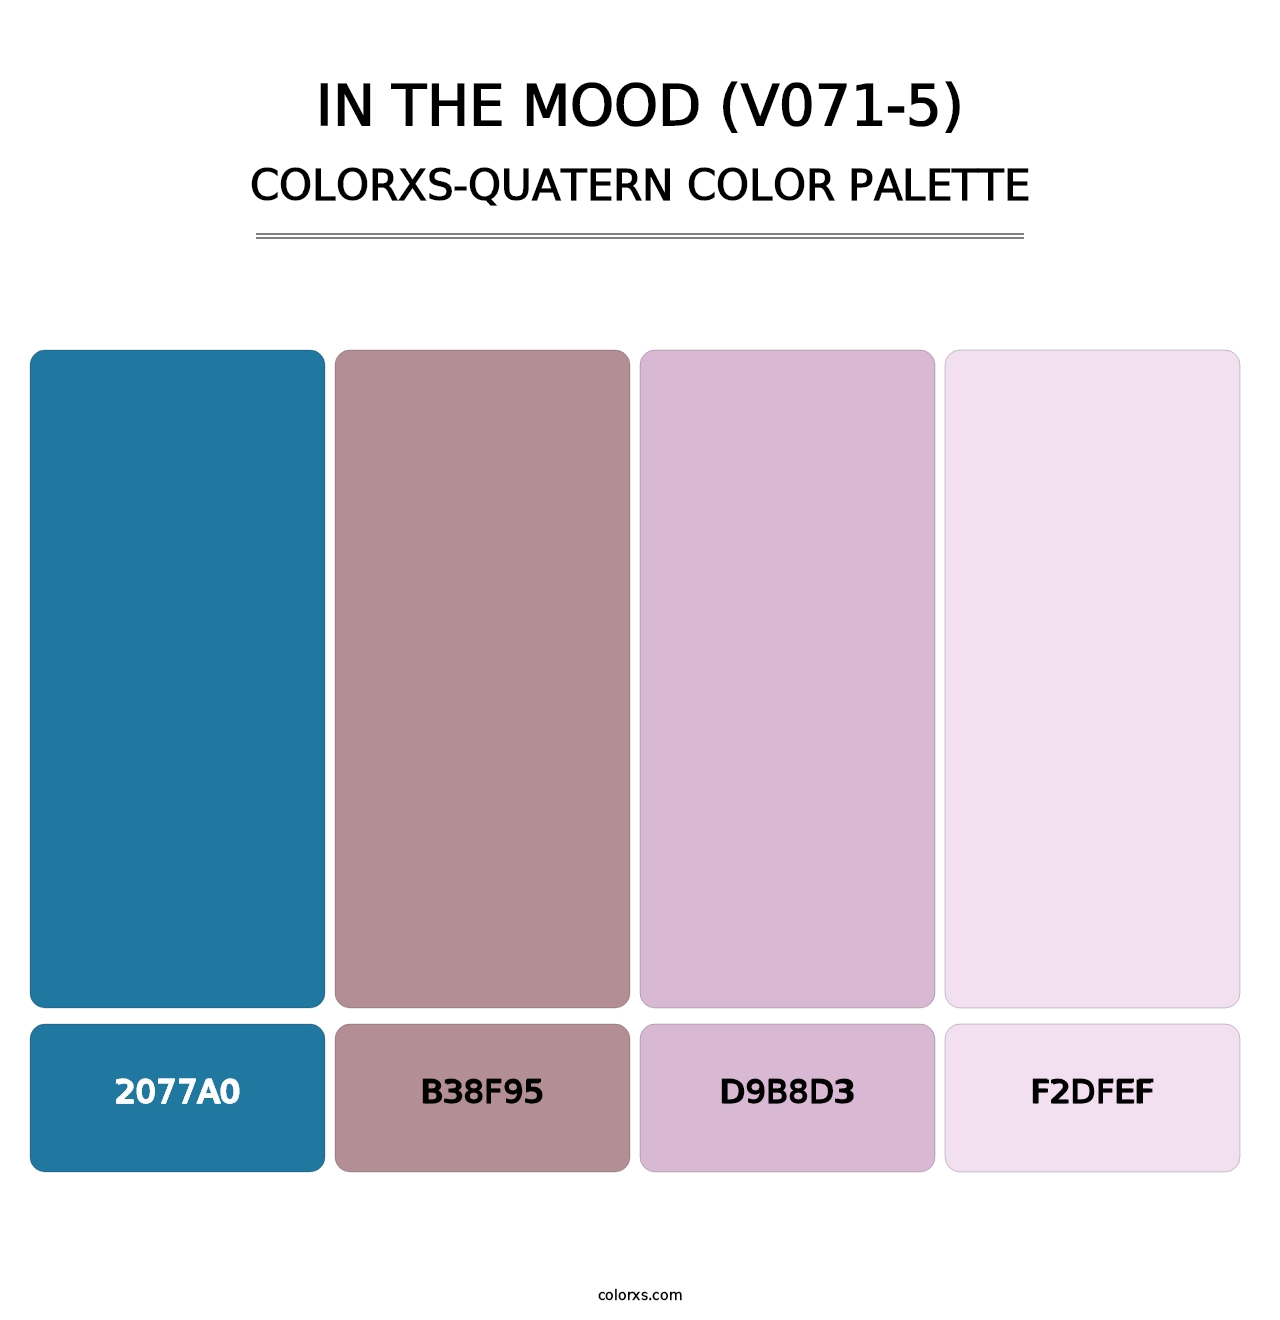 In the Mood (V071-5) - Colorxs Quatern Palette